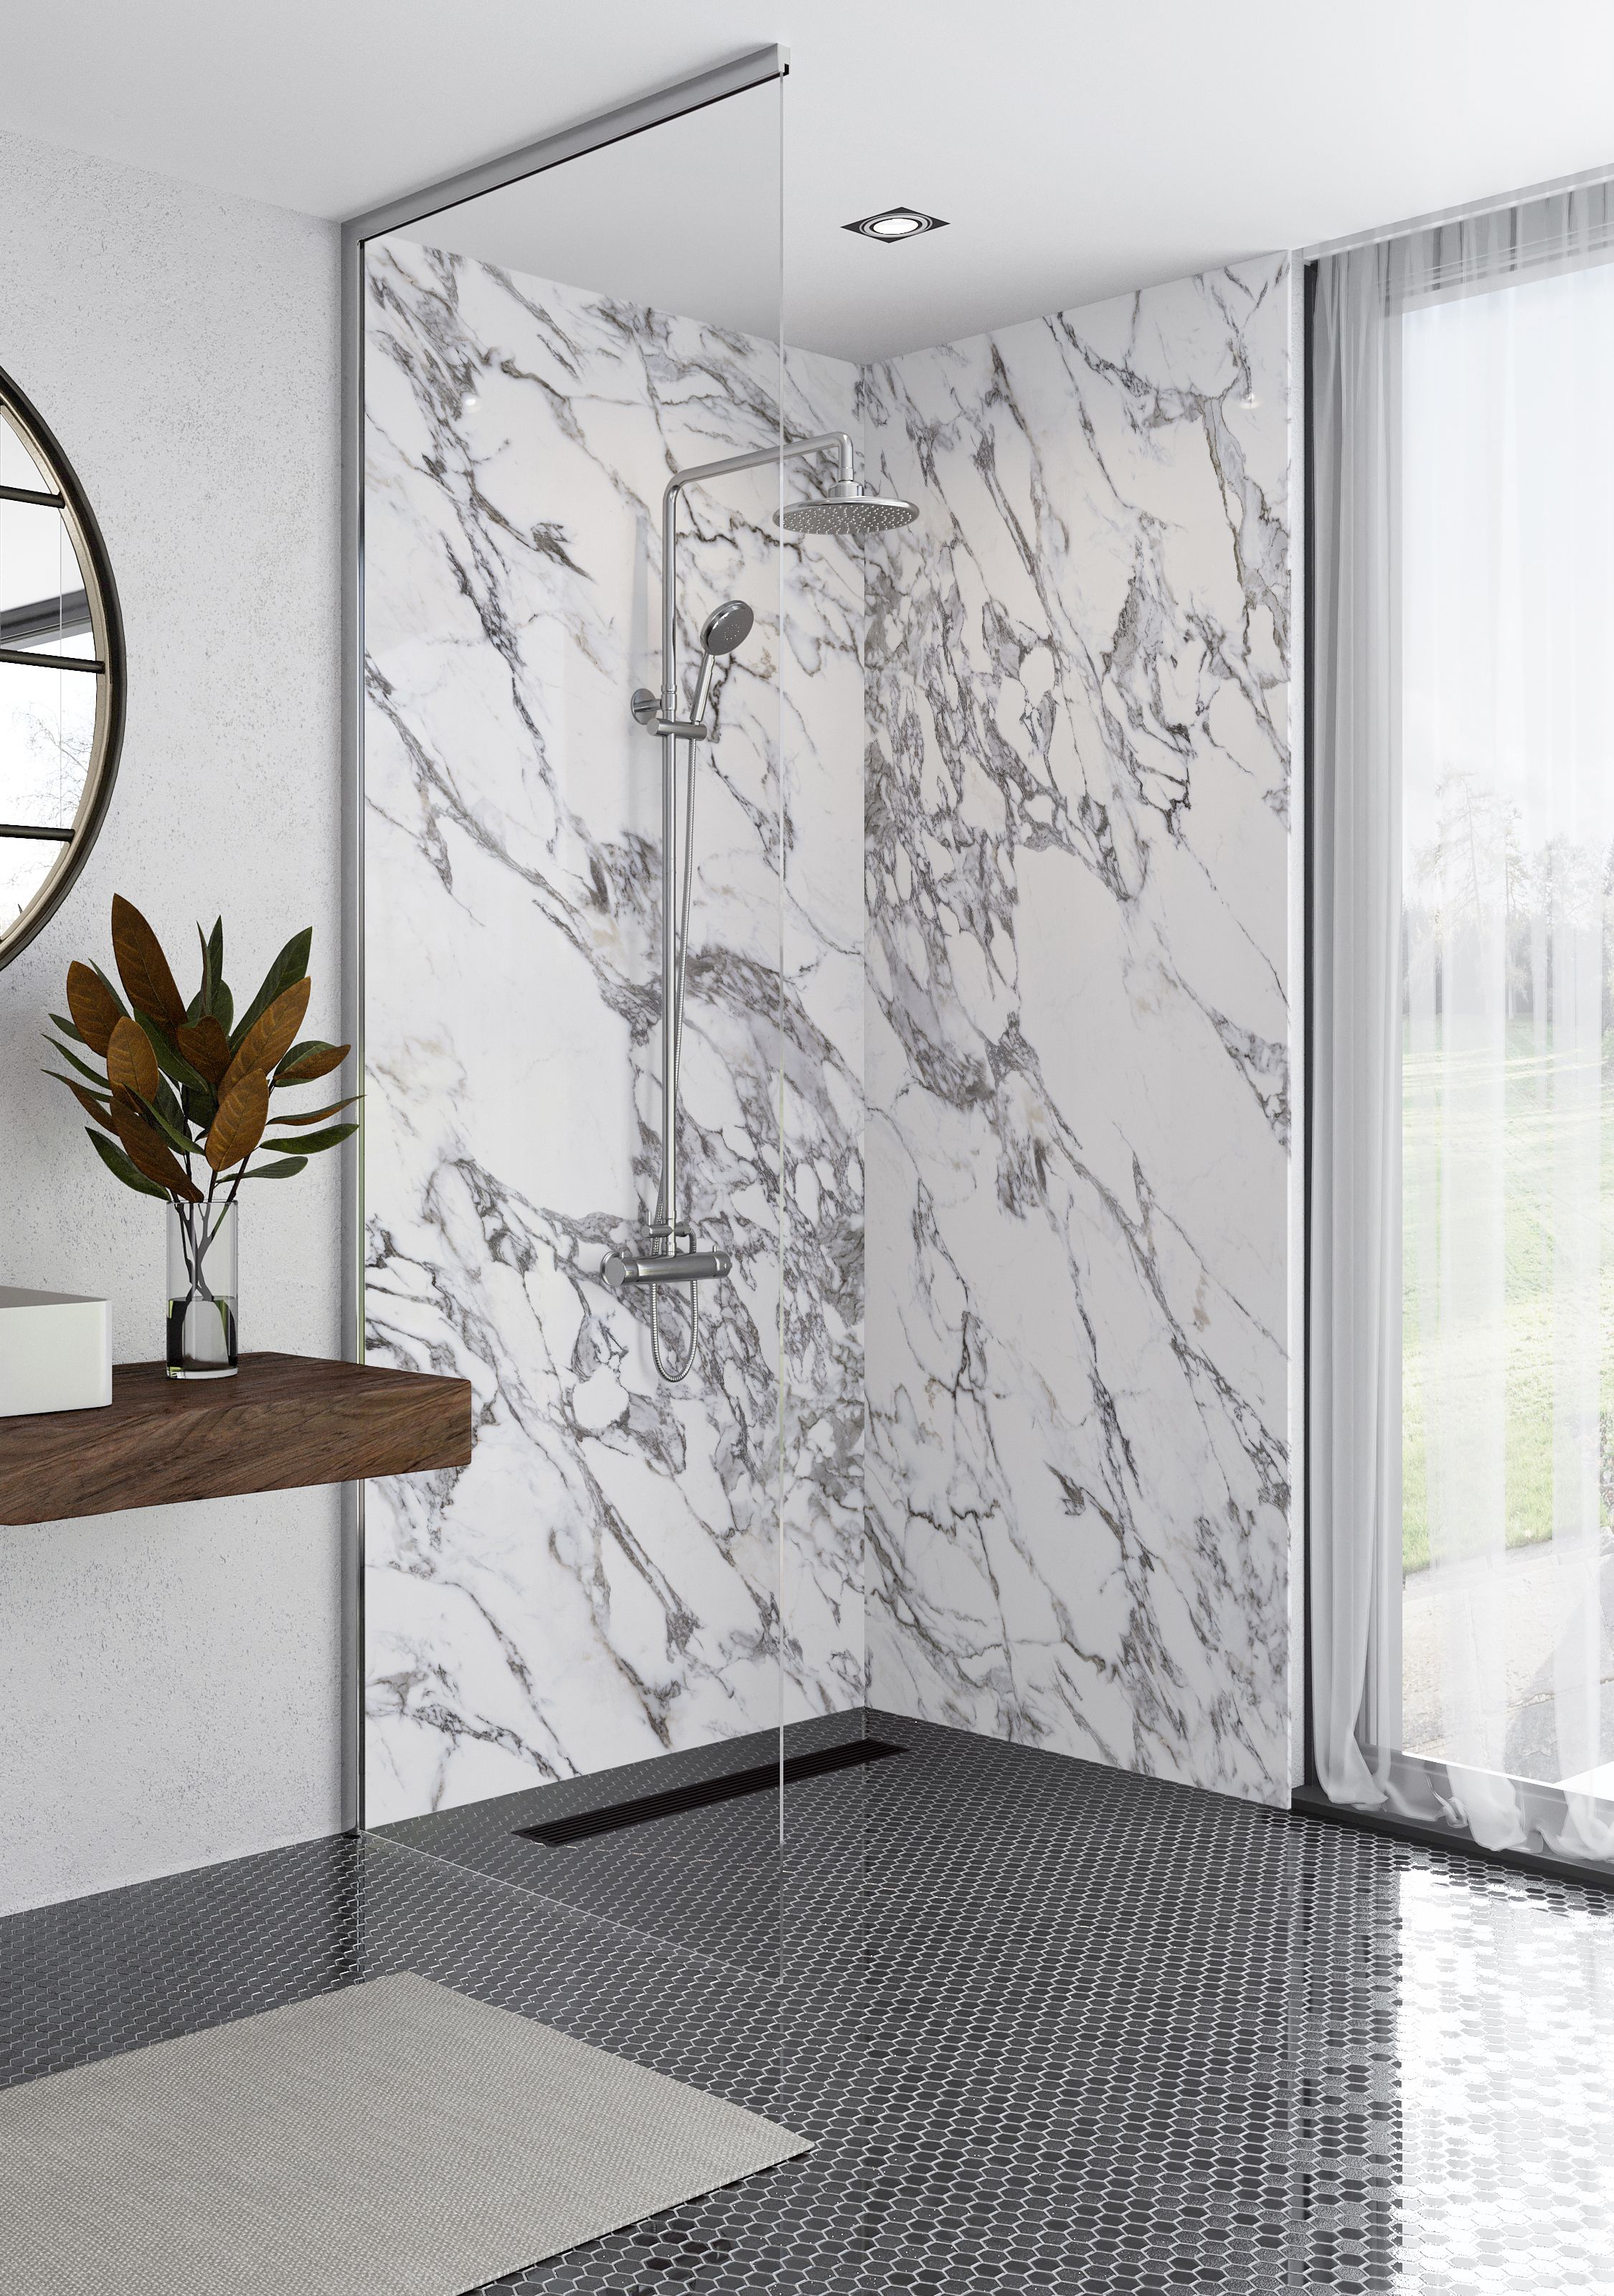 Mermaid Elite Marmo Migliore Post Formed Finished Edge Single Shower Panel - 2420 x 1200mm